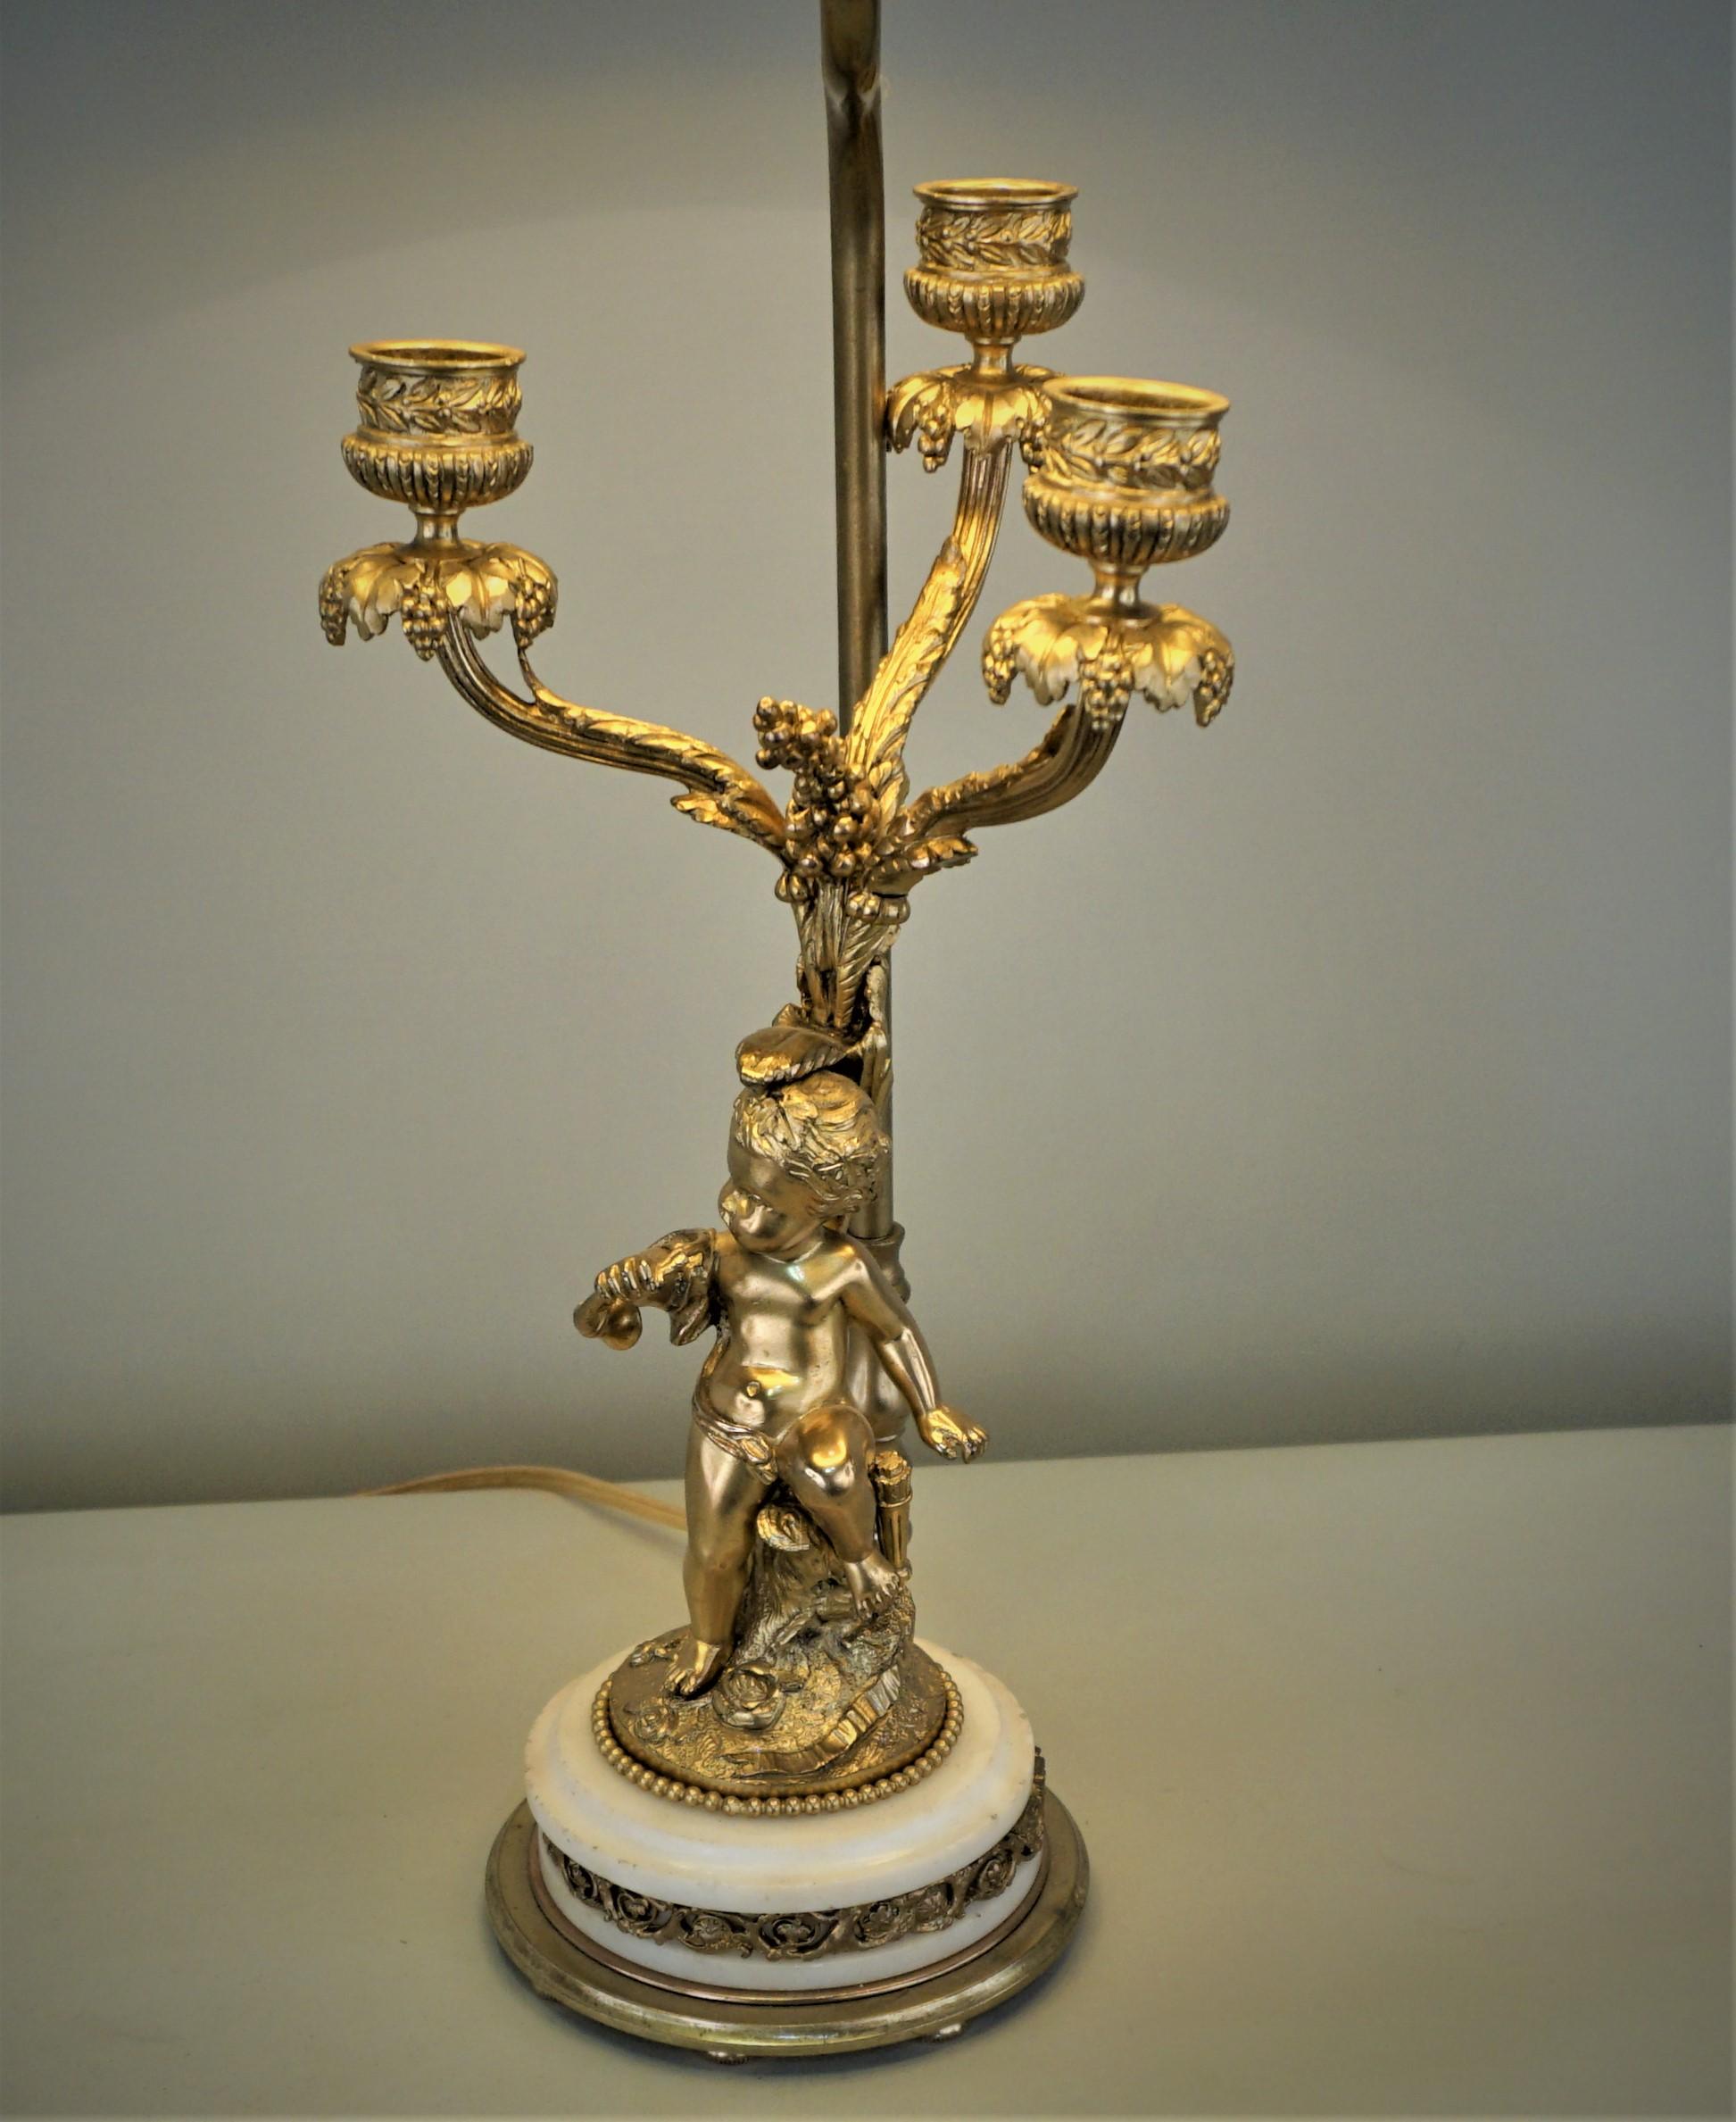 Elegant 19th century candelabra that has been porffecinally electrified and fitted with hardback gold lining lampshade table lamp.
Single 3 way light bulb.